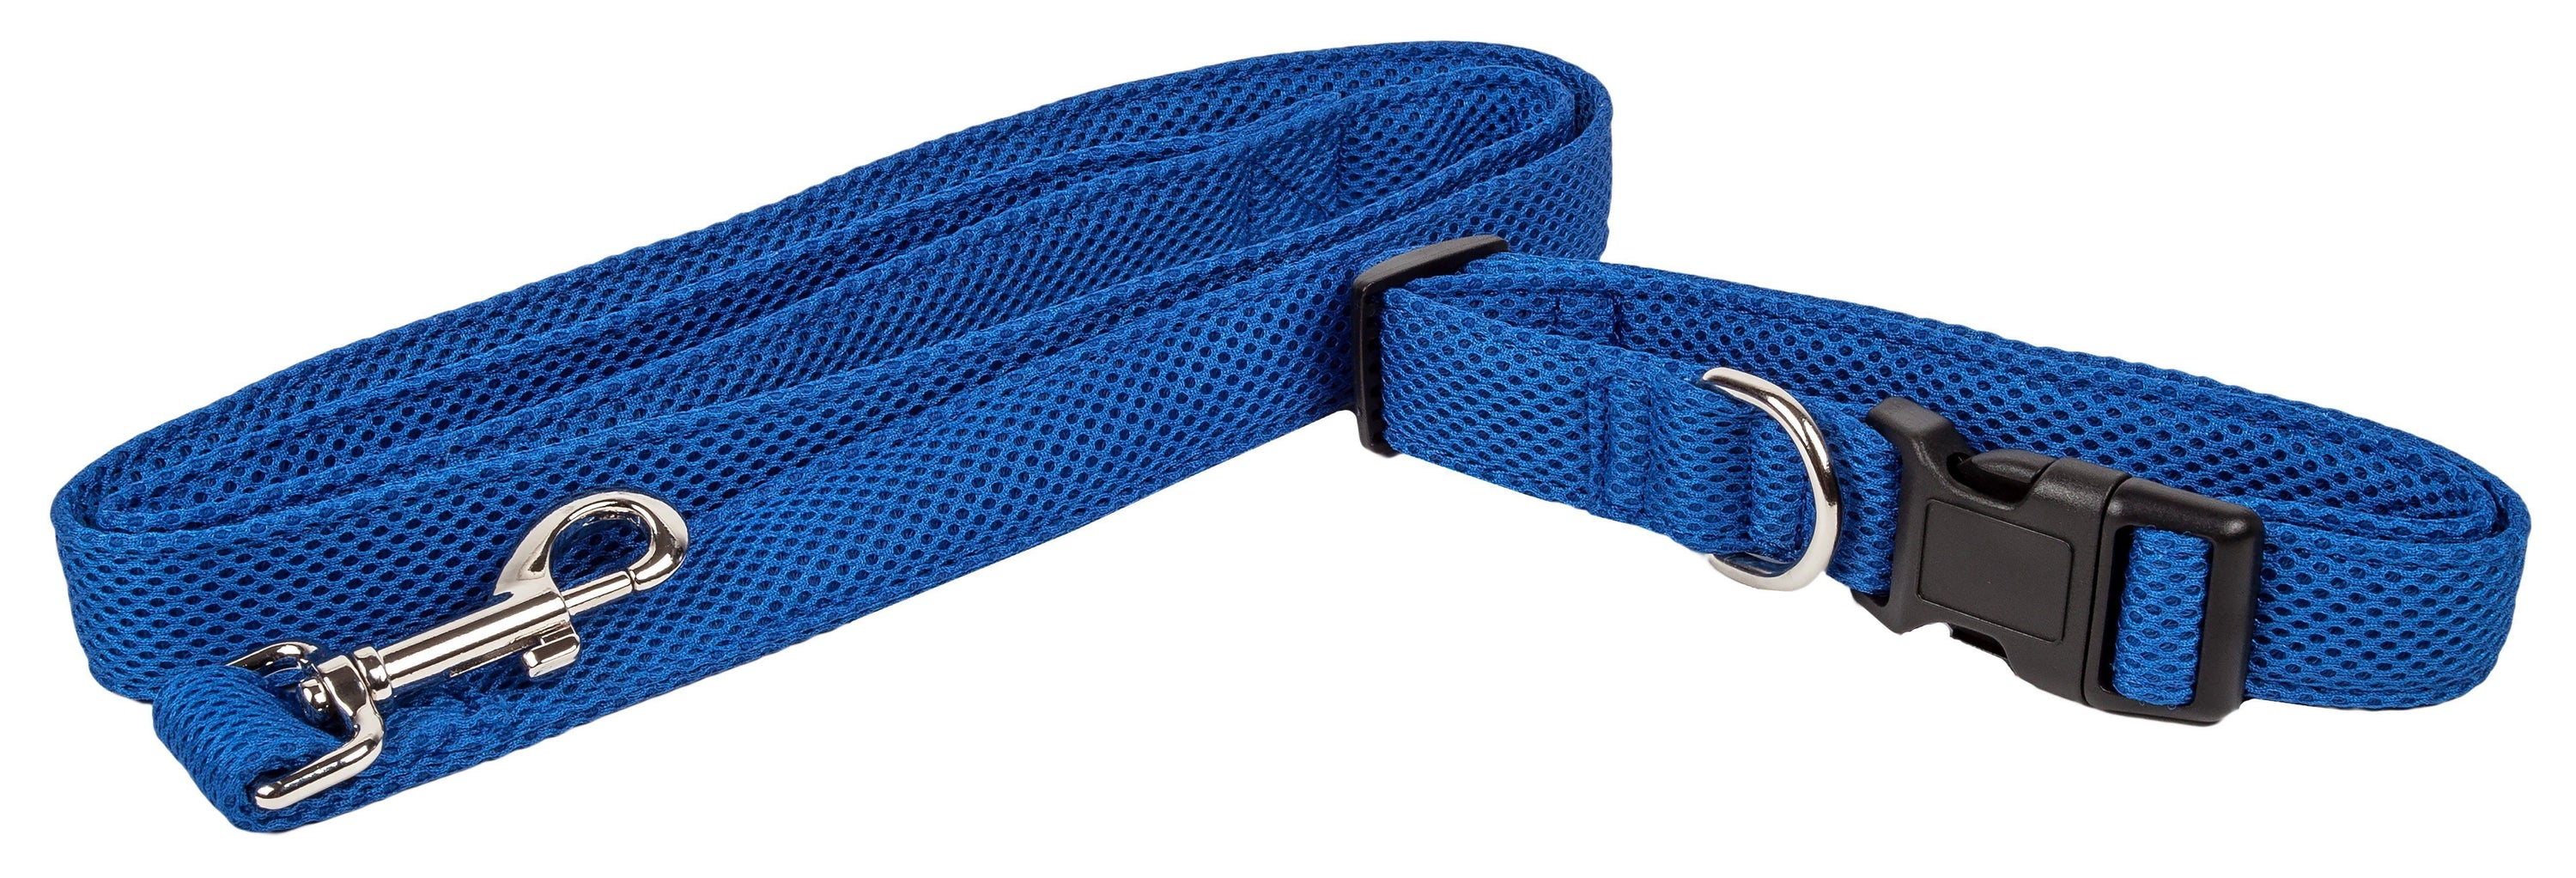 Pet Life ® 'Aero Mesh' 2-In-1 Breathable and Adjustable Dual-Sided Mesh Dog Leash and Collar  